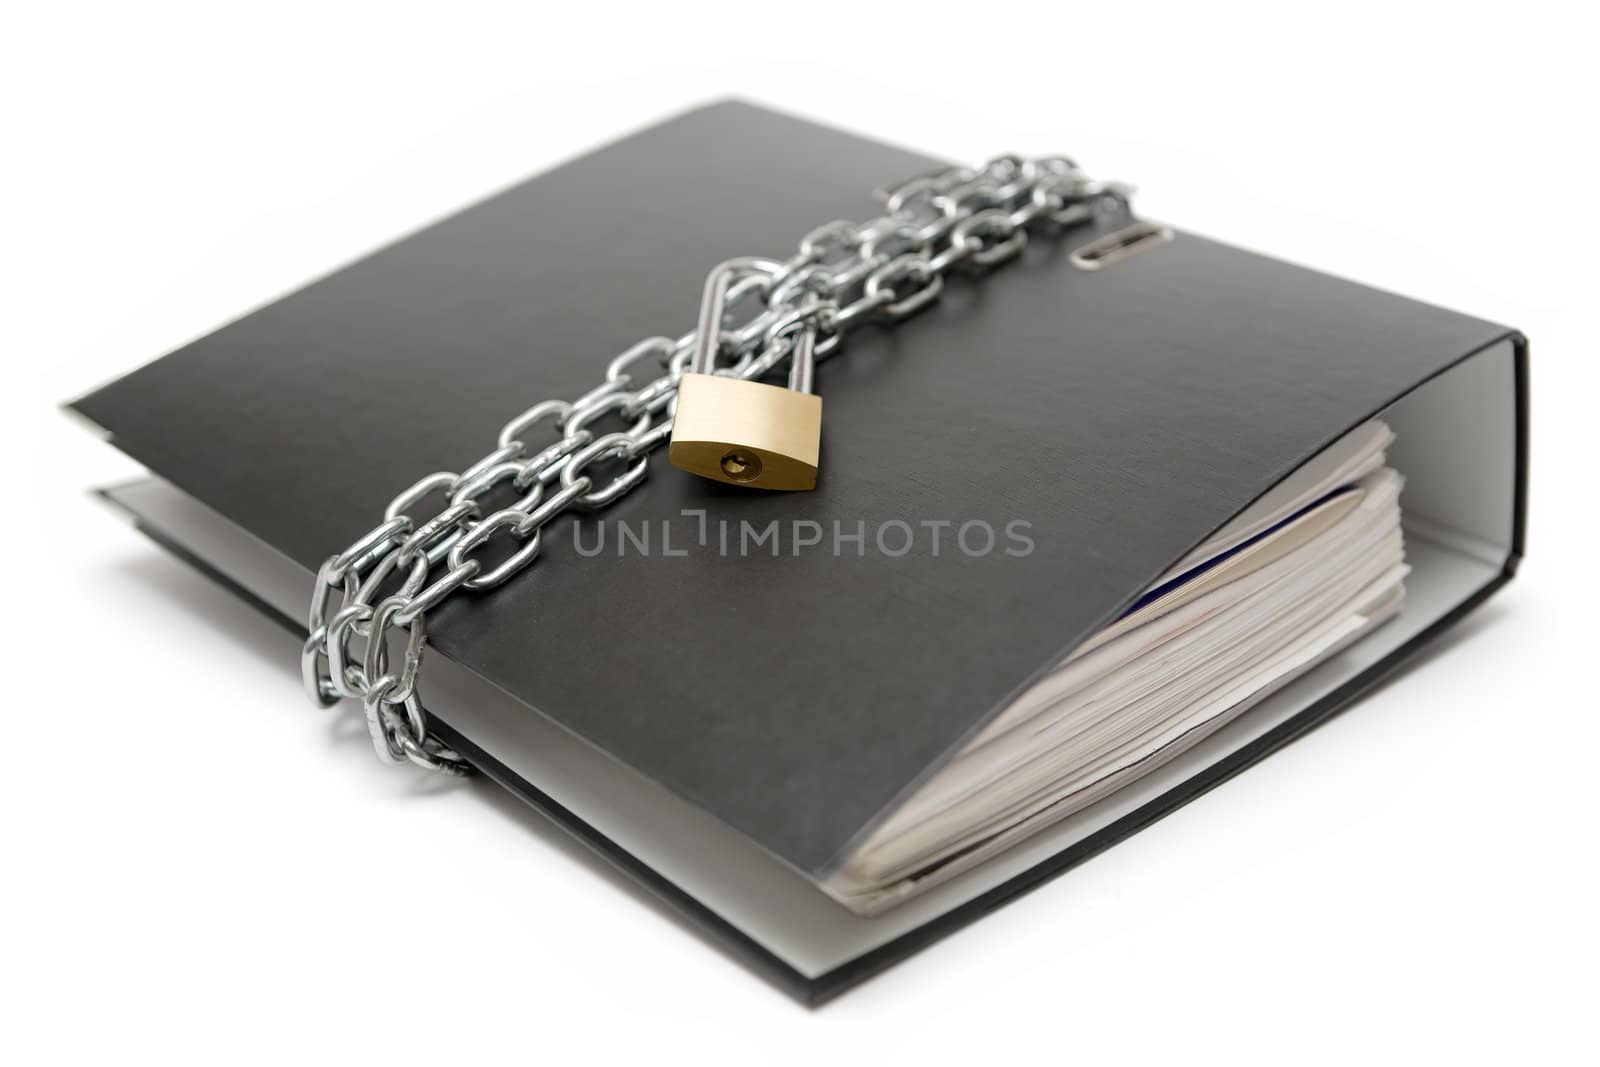 Protected Files by winterling